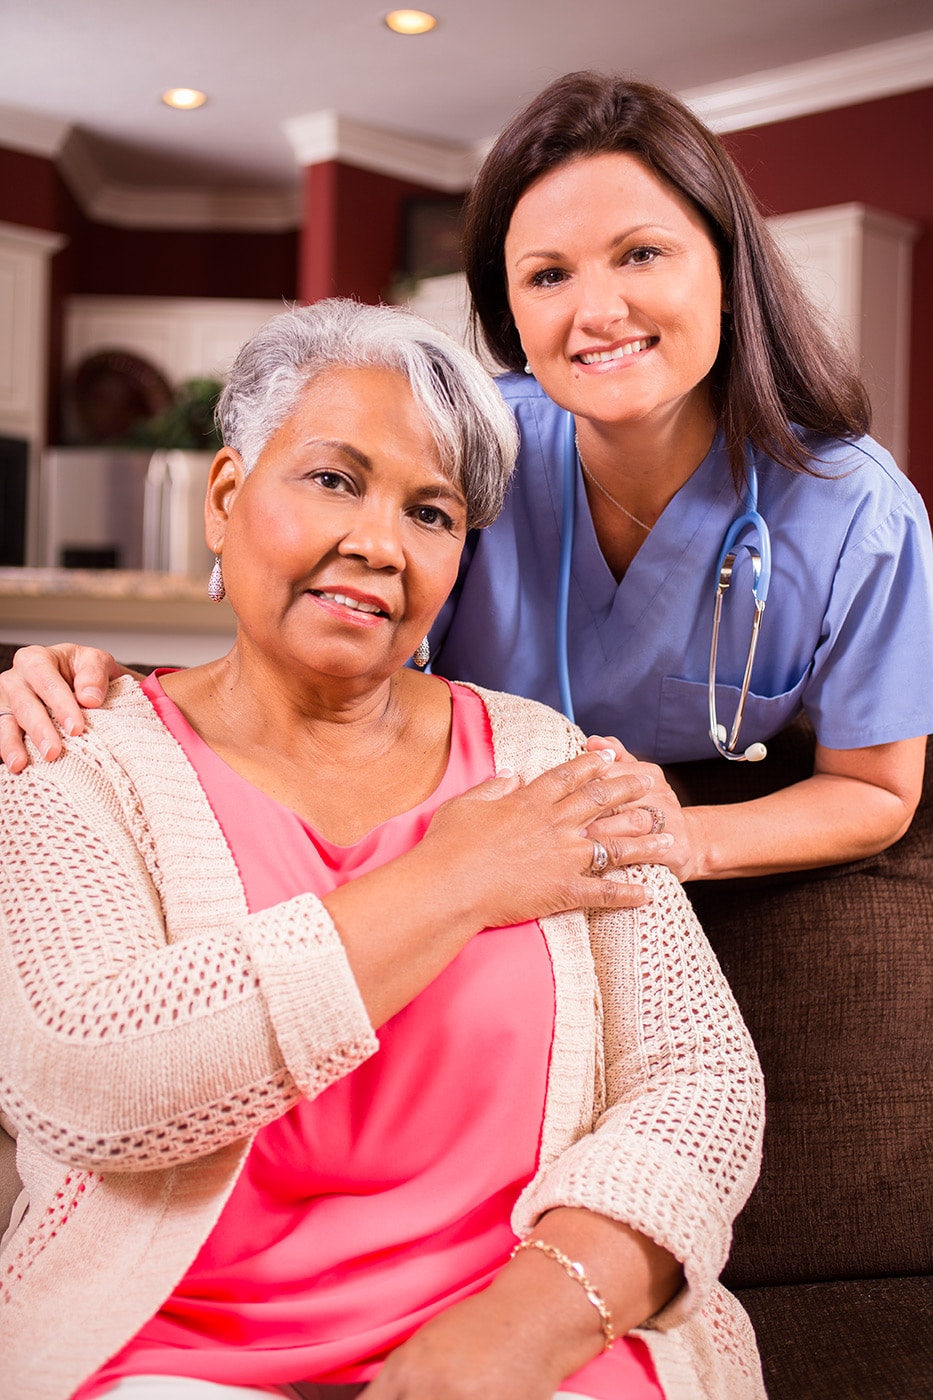 Older woman smiles while placing her hand over the hand of a younger nurse.